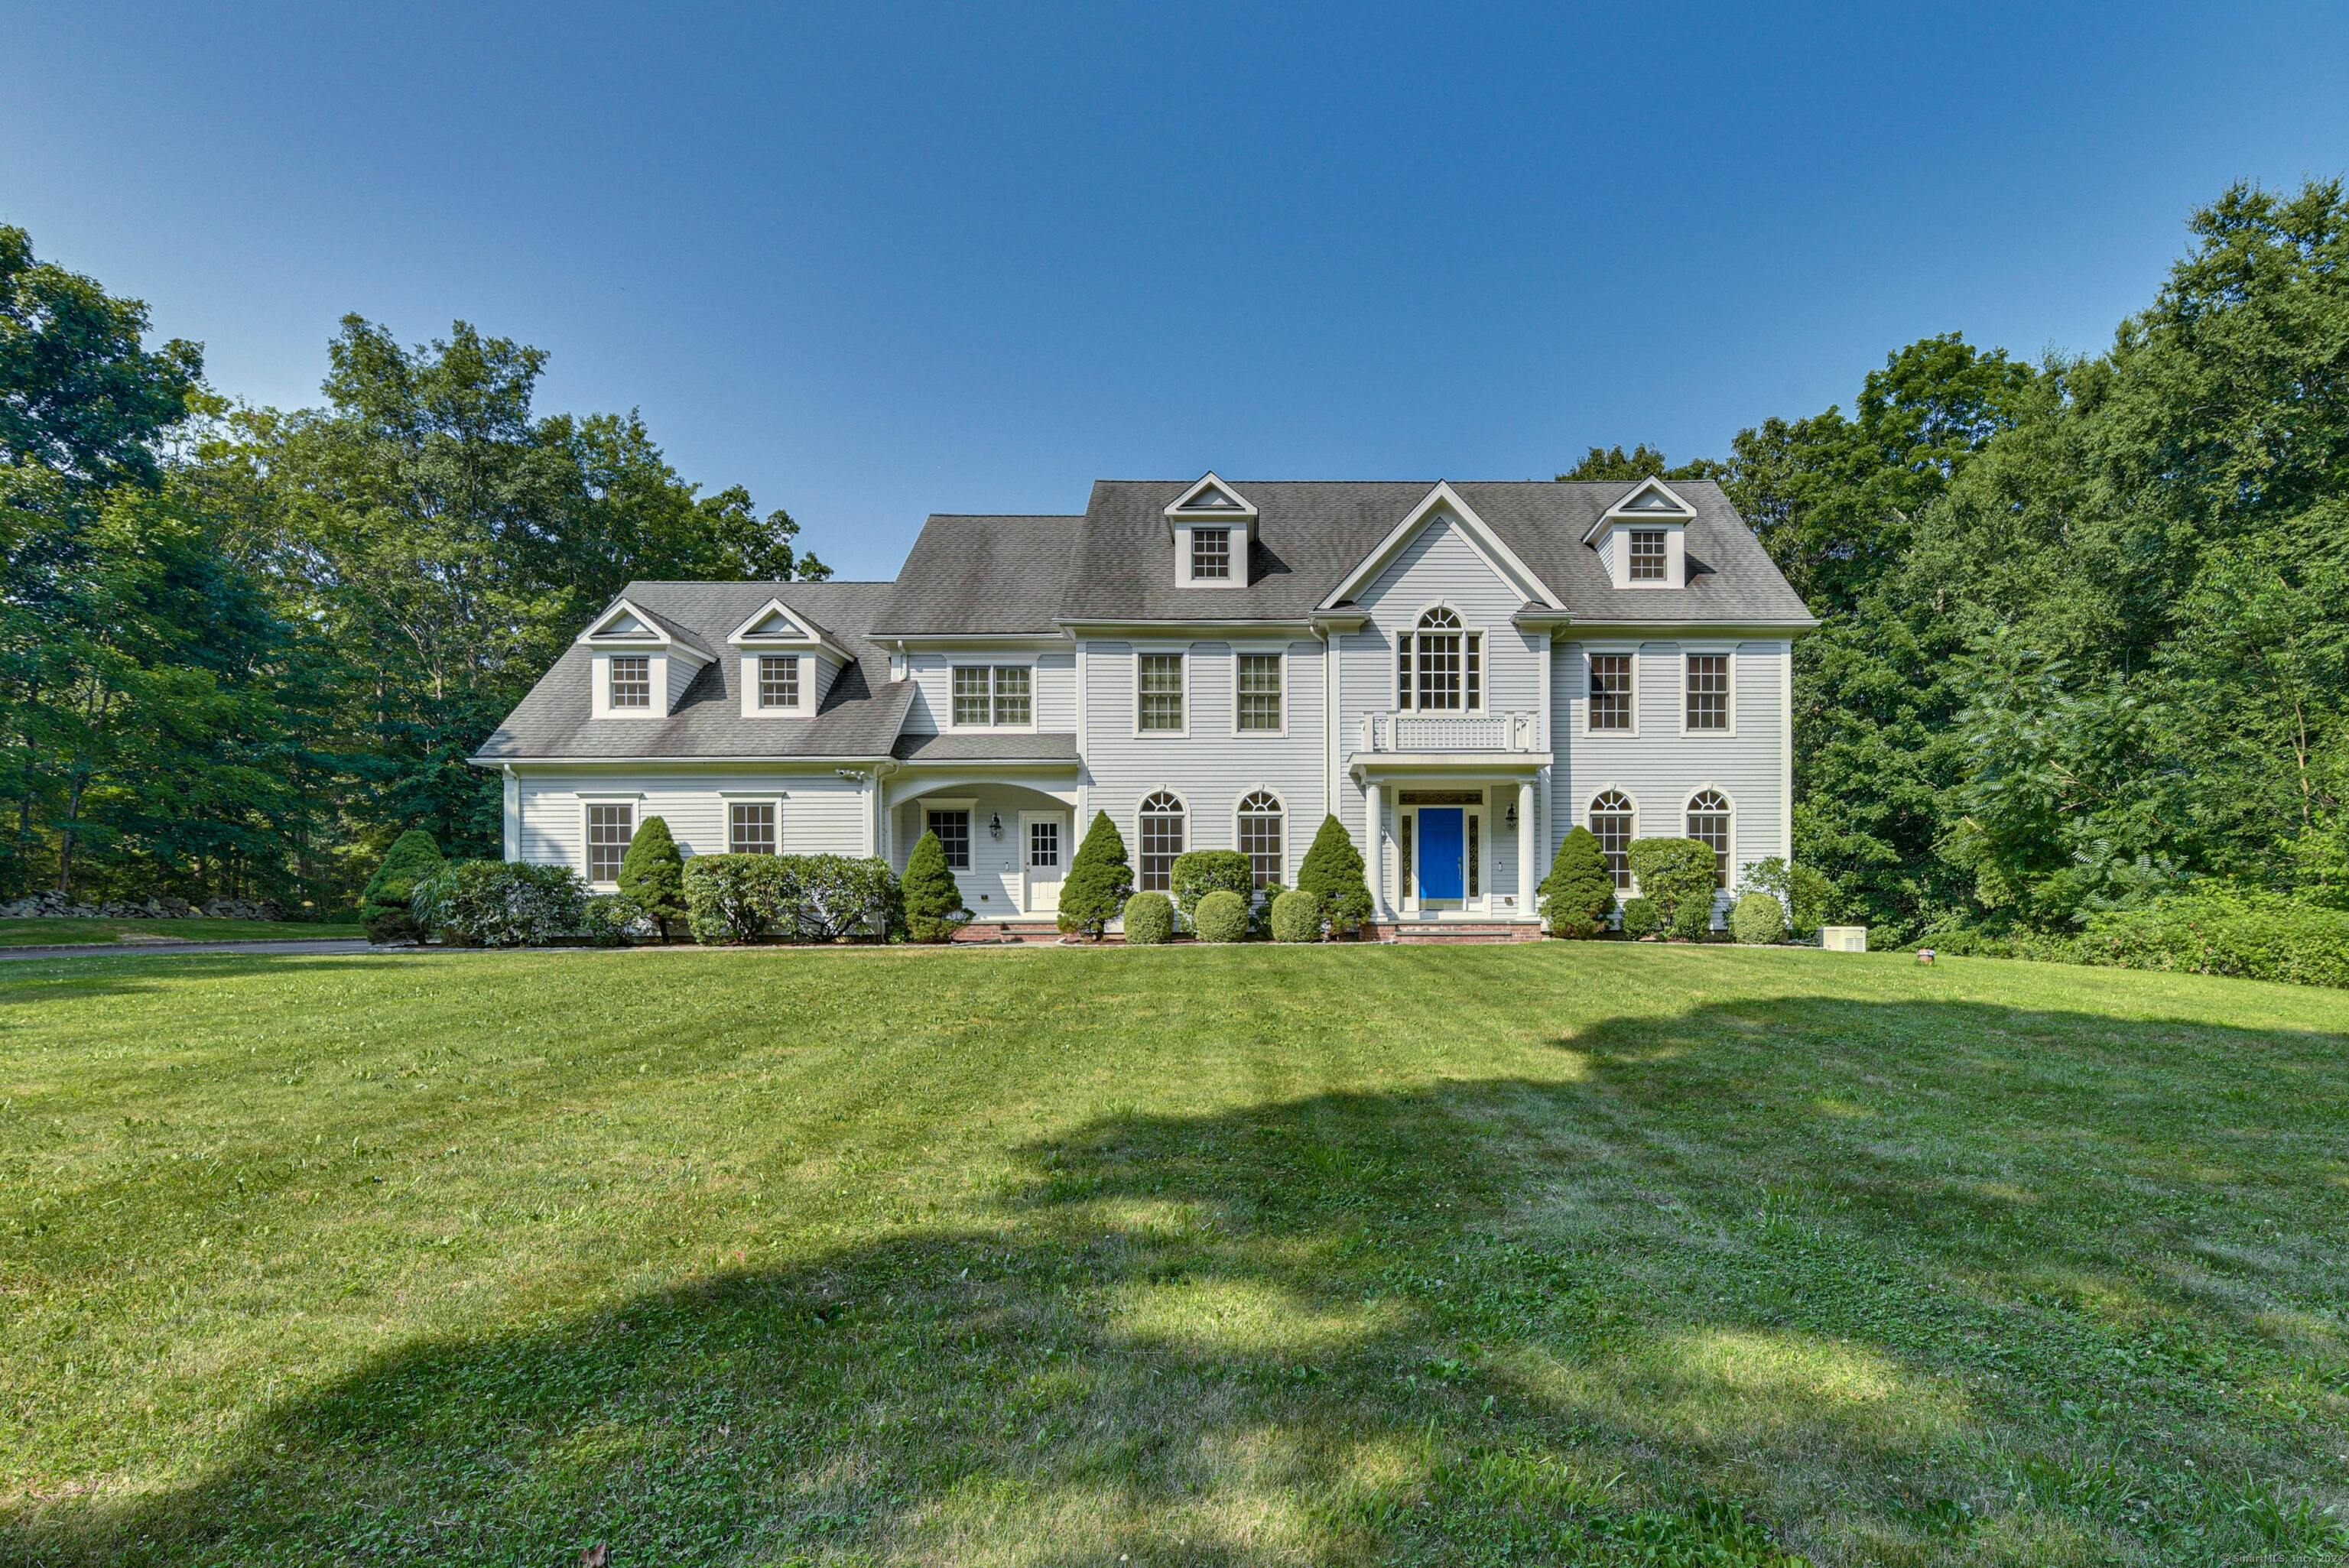 Welcome to 19 Old Sow Road, a 2007 stately Center Hall Colonial that exudes classic elegance, sophistication and modern comfort. Spanning 4516 sq ft with an additional 2,075 sq ft unfinished walk-out basement, this 5-bedroom, 4 full and 2 half-bath home is a testament to sophisticated country living. Upon entry, your are greeted with a bright and airy interior. The grand 2-story foyer with marble flooring leads to a cherry and granite kitchen, equipped with Wolf, Sub-Zero, and Miele appliances, opening to a family room with cozy gas fireplace. Formal living and dining rooms, along with a convenient mud room, enhance the home's functionality and thoughtful design. Upstairs, the primary suite offers a marble bath with dual sinks, a separate shower and a jetted tub. Two ensuite bedrooms and two sharing a Jack-and-Jill bath complete the upper level. High ceilings, hardwood floors, striking mill work, and a walk-up attic for storage add to the home's timeless appeal. Nestled on 3 verdant acres on a quiet country road, the property includes a 3-car garage and a 22KW auto generator. First owners, excellent condition, and ready for your personal vision! Mere minutes to Easton Center and Fairfield area sites, shopping, farms, restaurants, commute routes. Discover bucolic Easton, CT, an oasis of rural charm... Discover 19 Old Sow Road... timeless appeal, sophisticated country lifestyle and a home where memories are made.